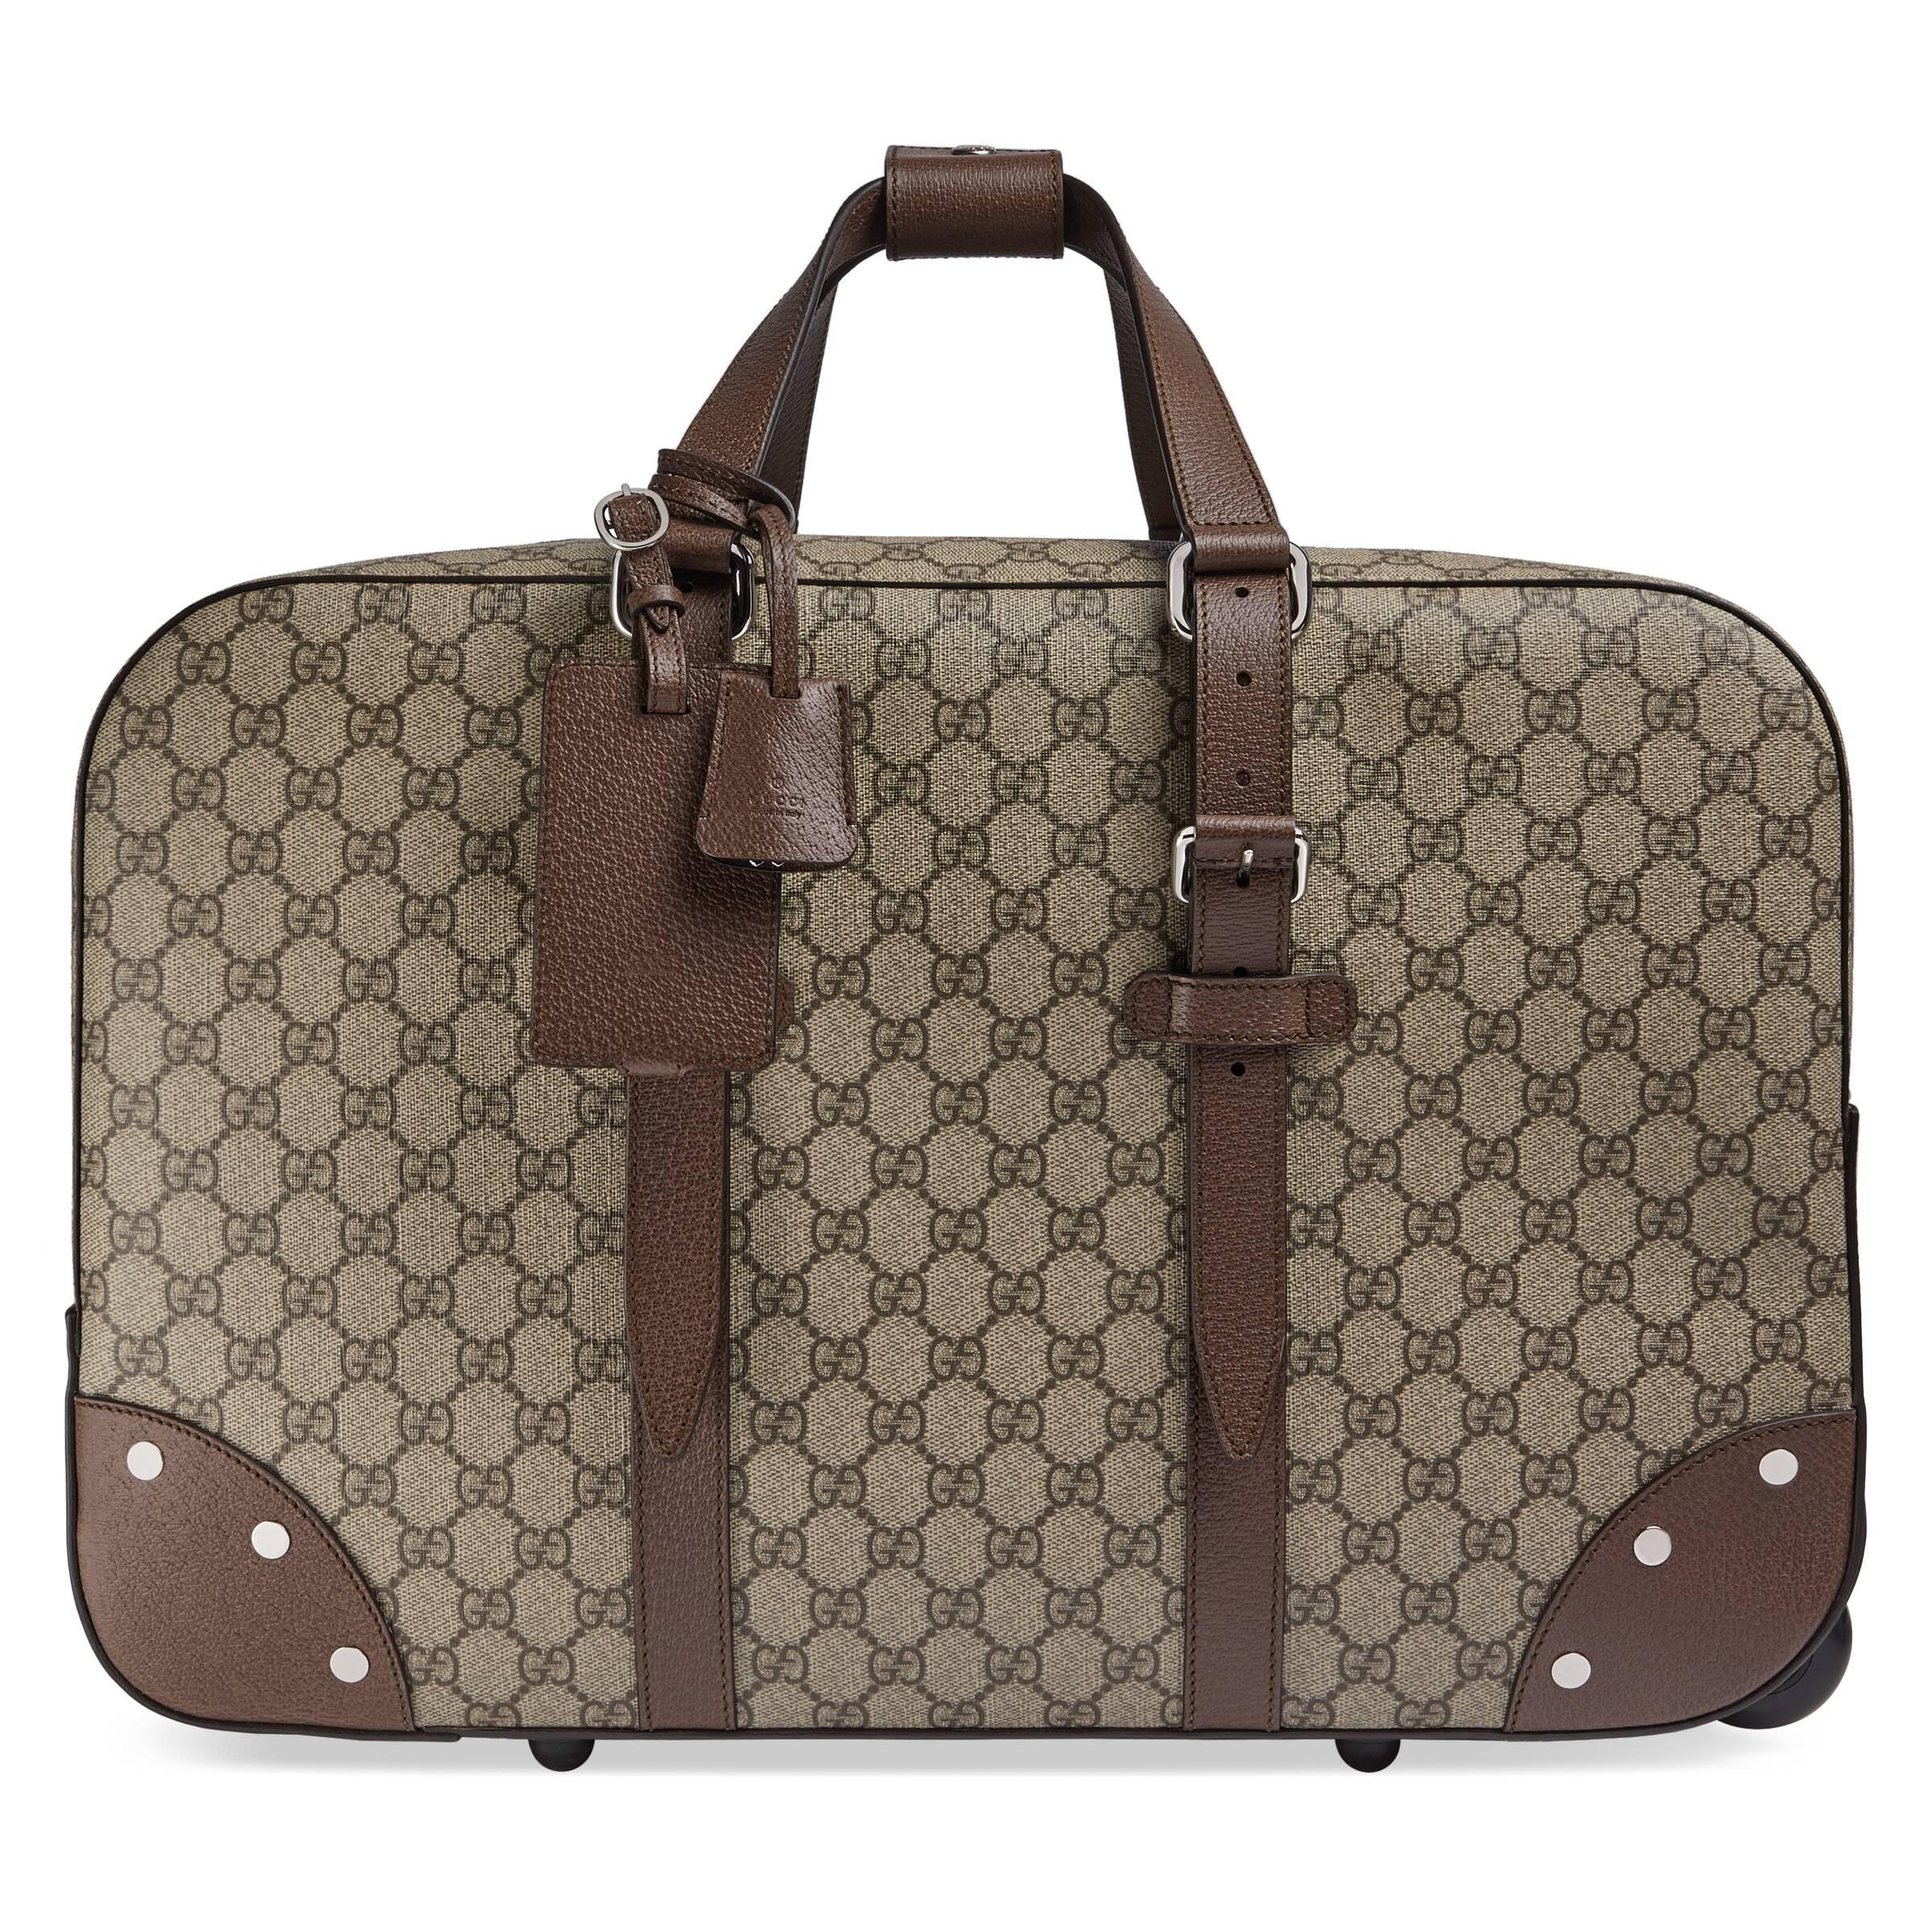 Luggage & Travel bags Gucci - Carry on duffle bag - 206500BNX1G1000